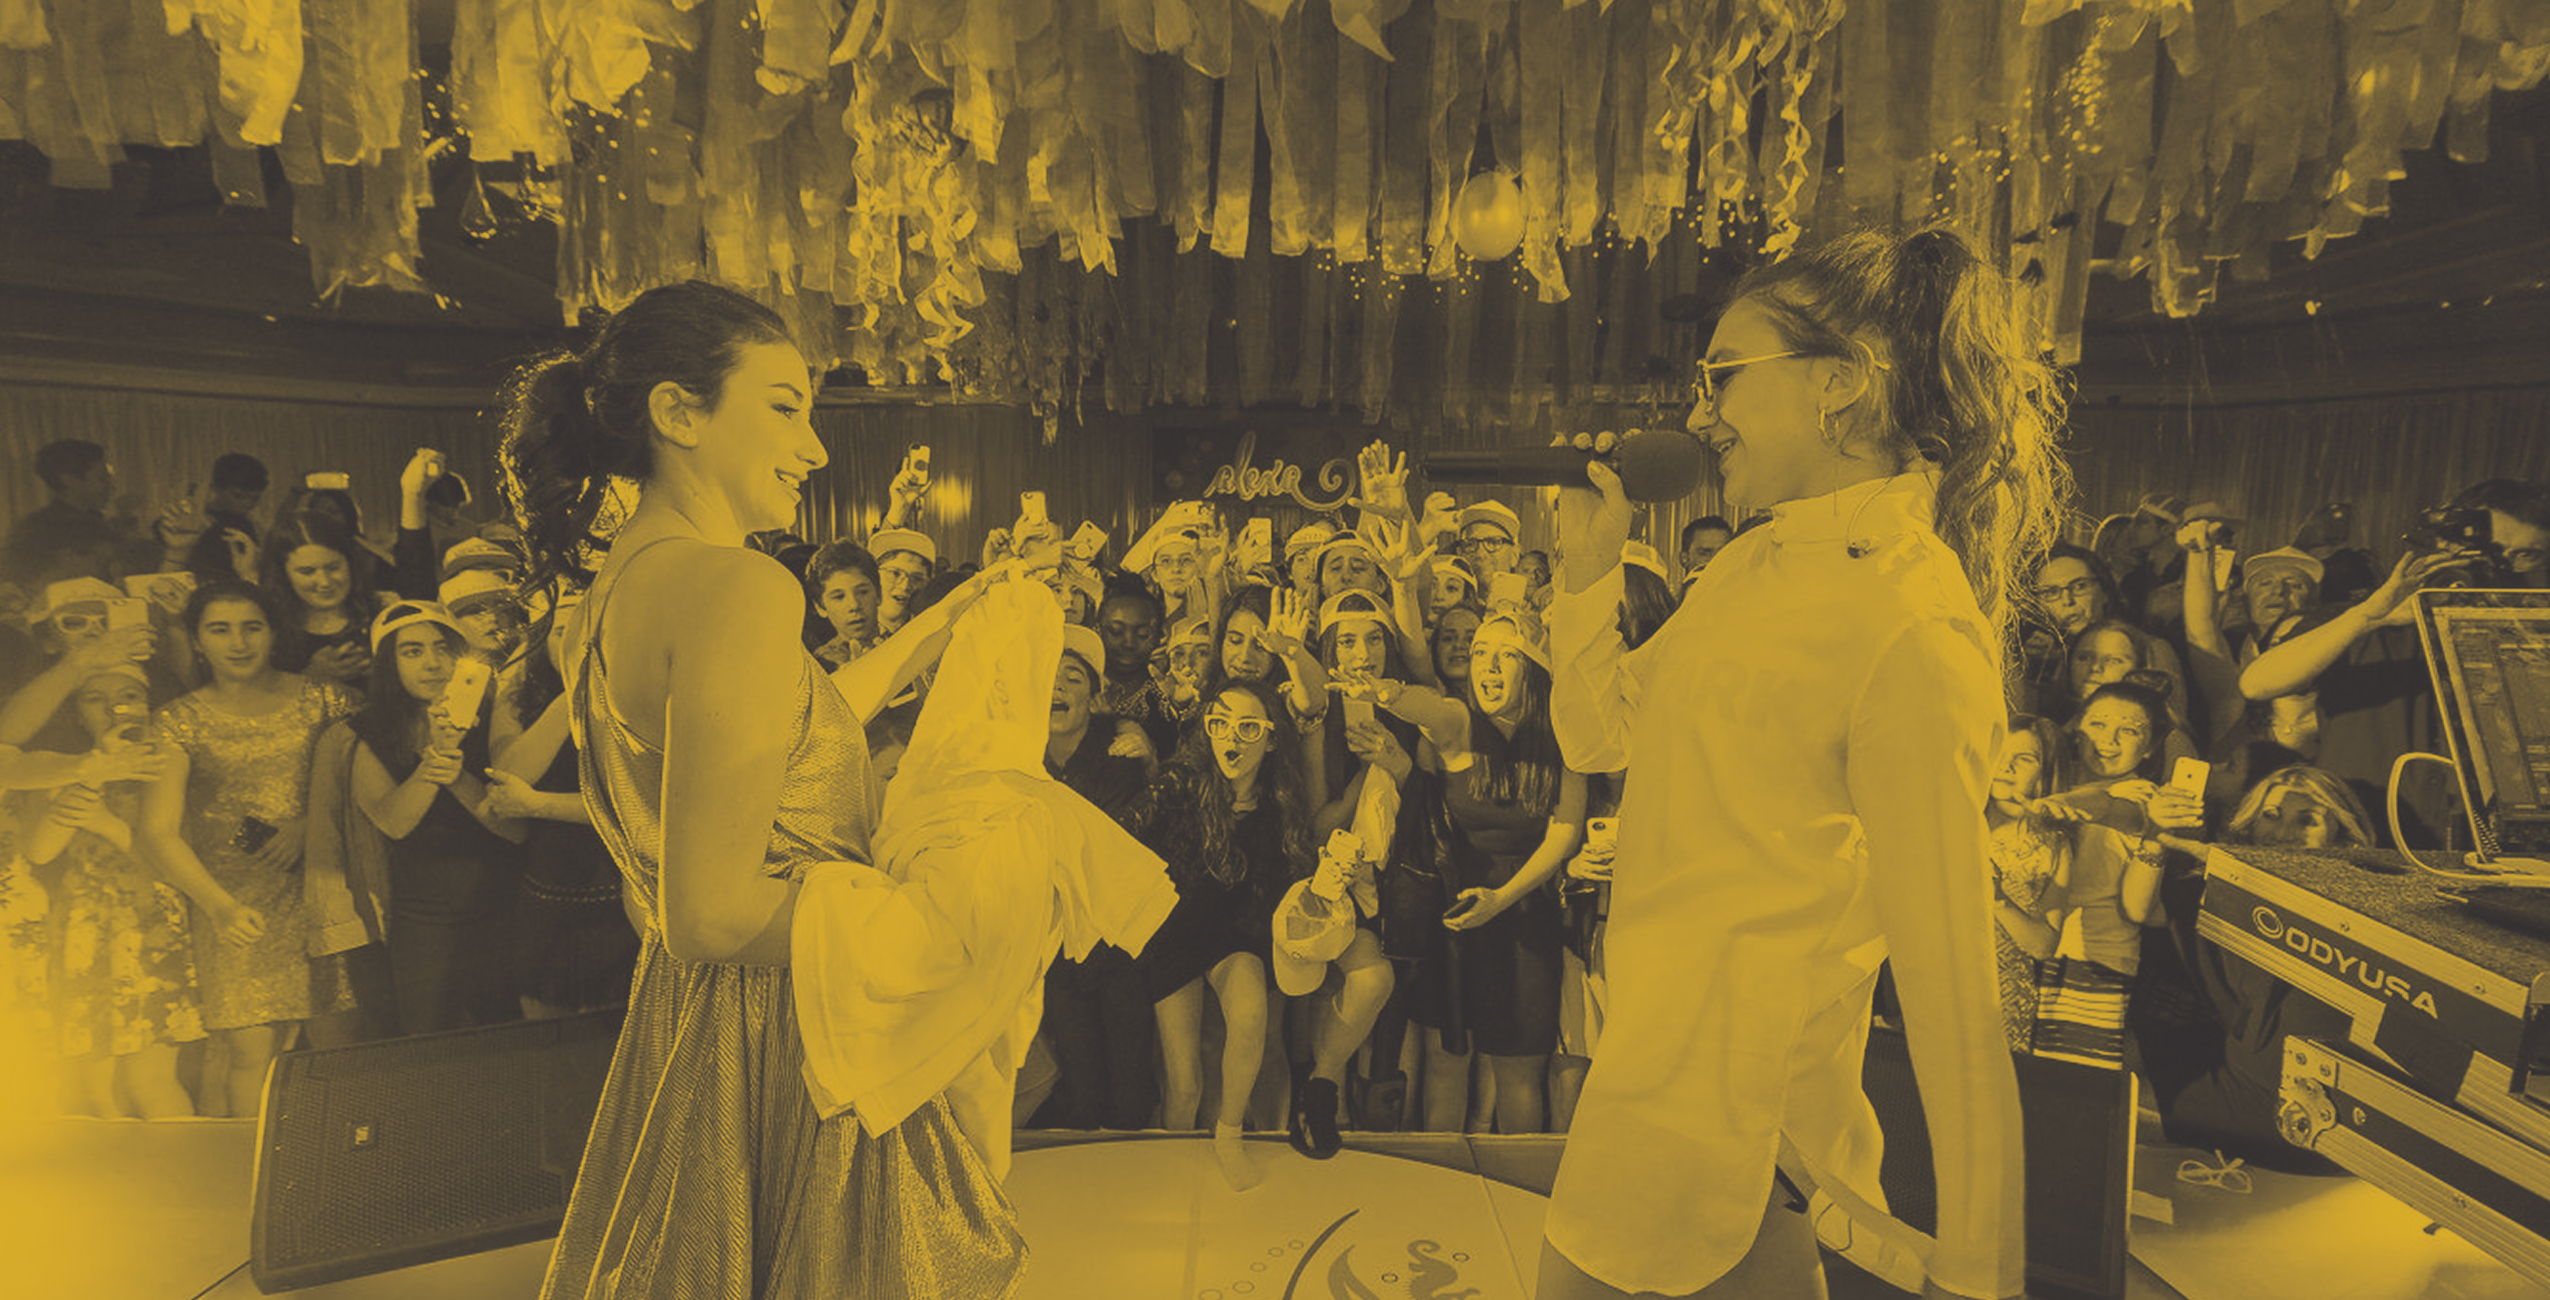 Landscape brand page header image shows a Mandell event with two event guests on stage in front of a small teen crowd behind a duotone yellow overlay treatment.